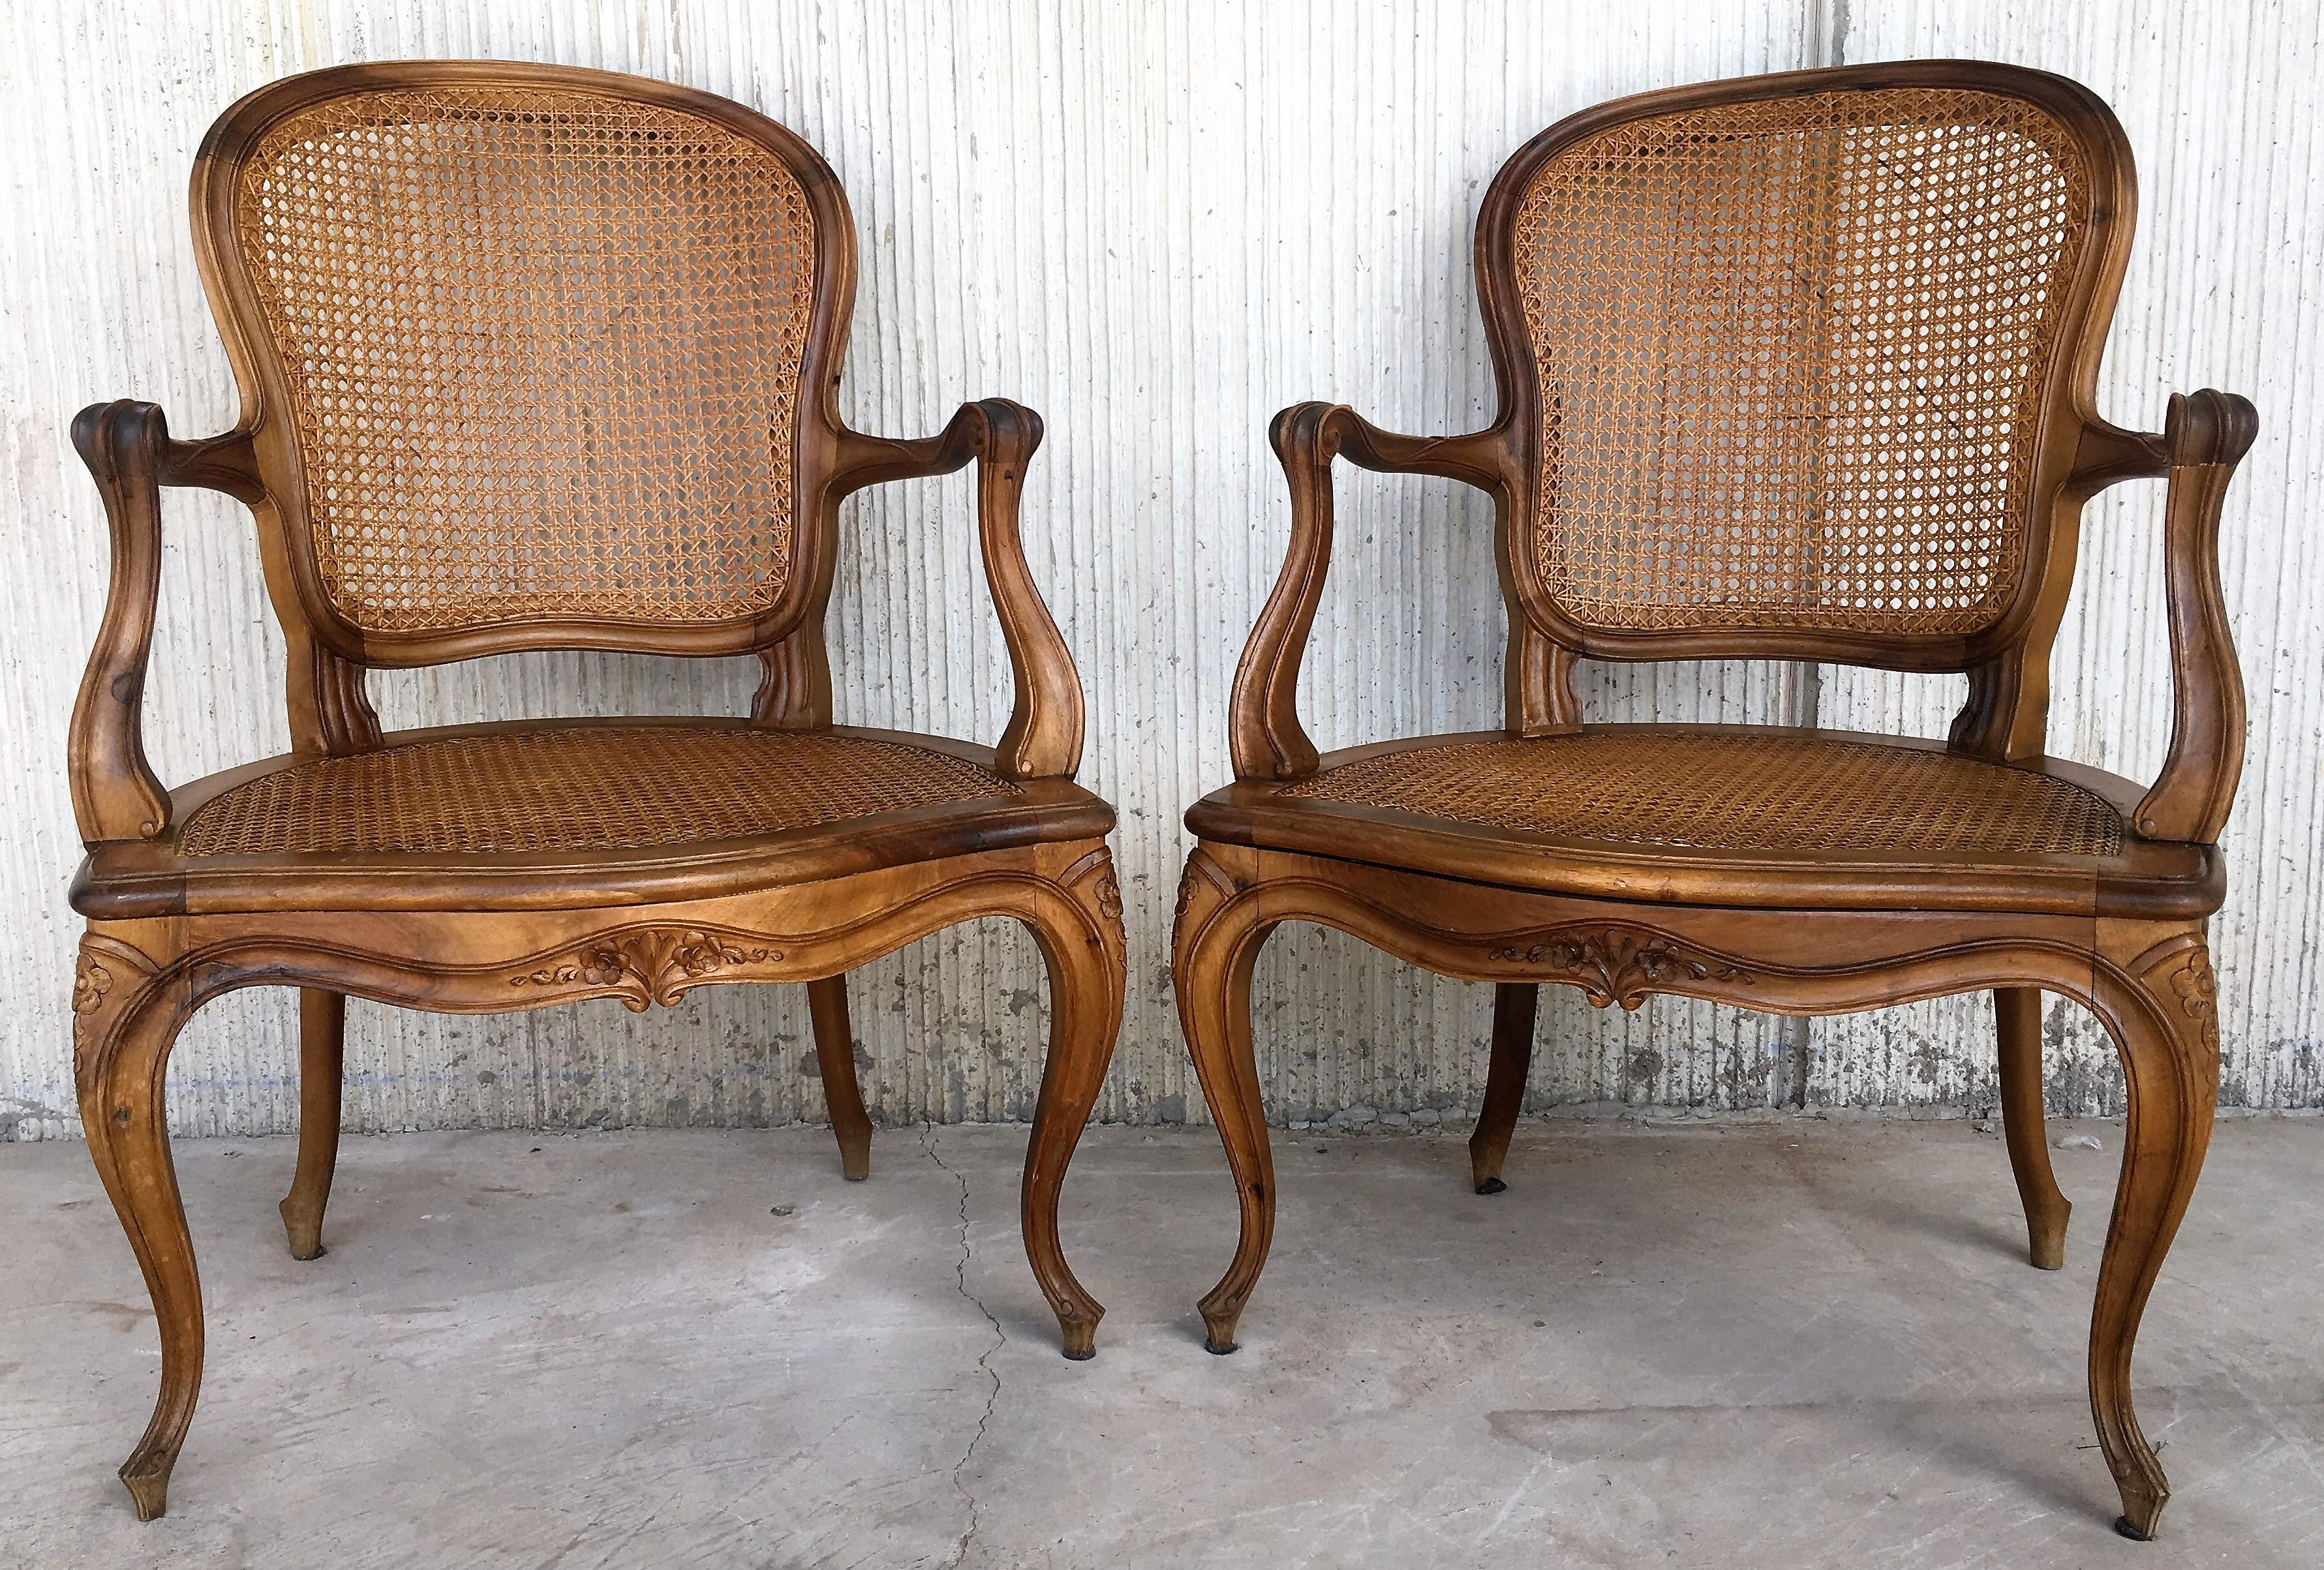 Louis XV carved Provincial Fauteil's with caned seats and backrests with velvet upholstered rigid cushions-seats, carved crests, rails, arms, and legs.
Really beautiful and perfect shape.